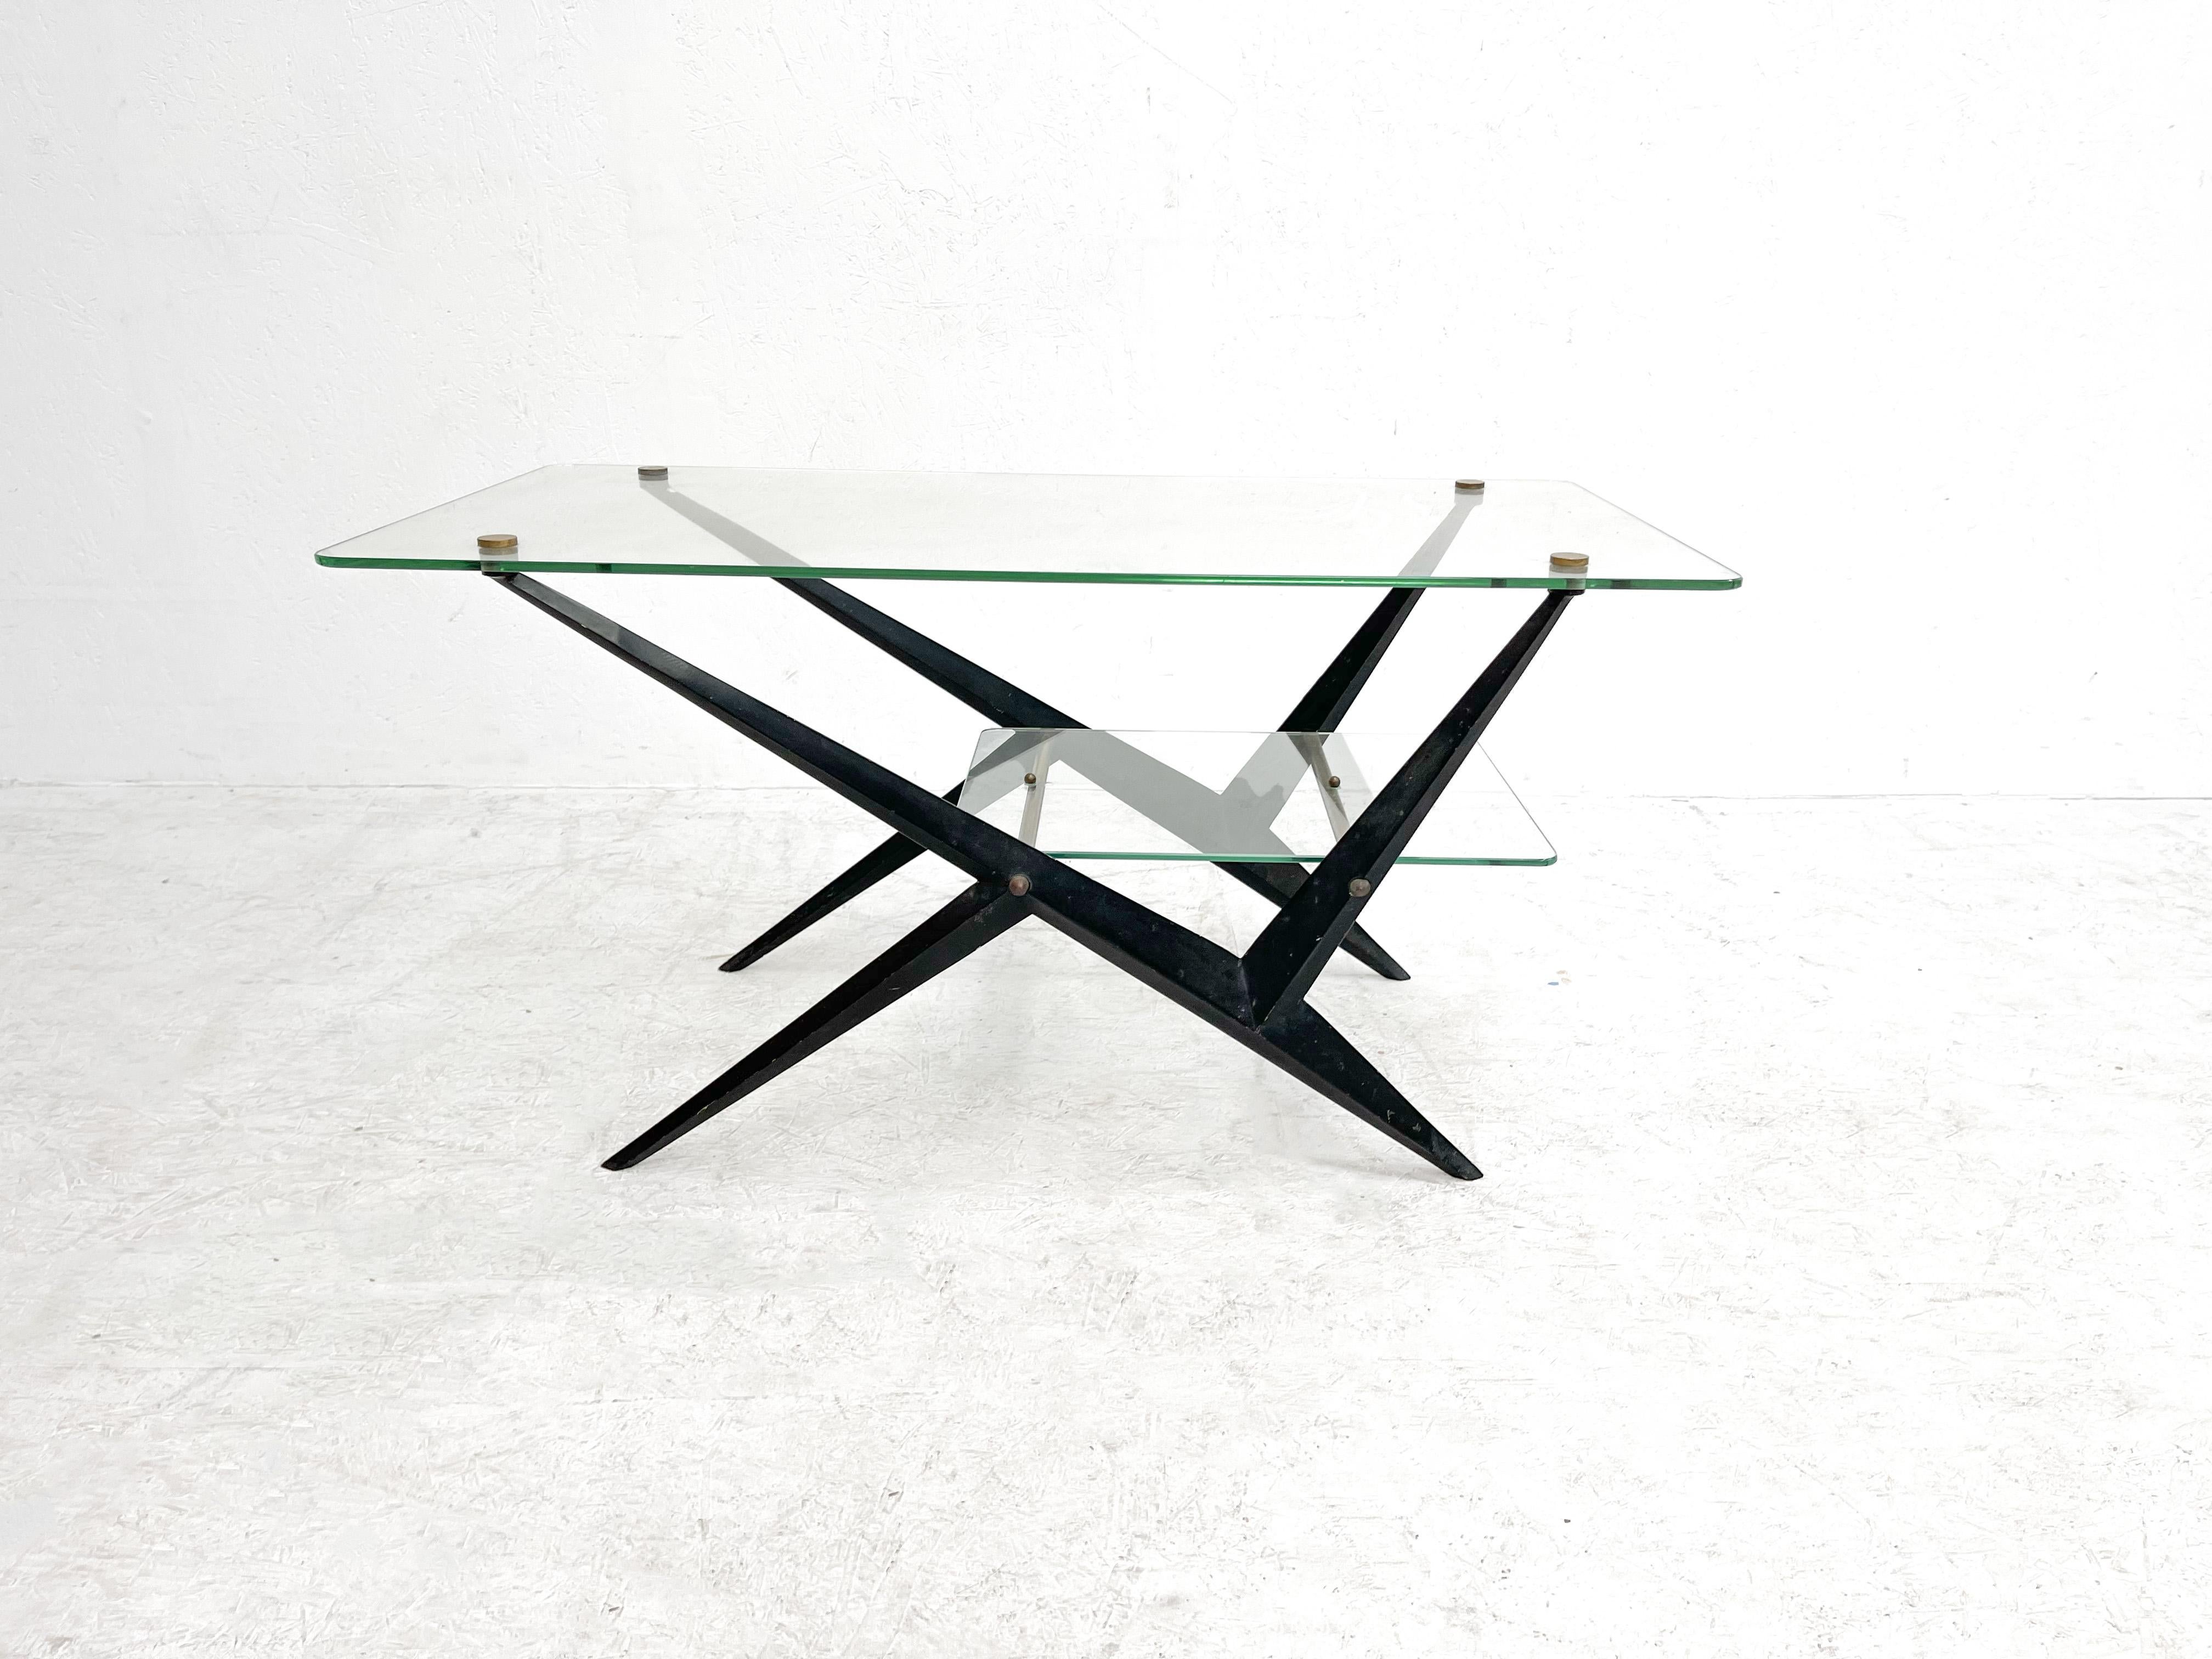 Coffee table by Angelo Ostuni
High quality coffee table made by Angelo Ostuni. Angelo Ostuni designed this coffee table in the early 50's. The table features a black lacquered frame with glass shelves and brass details. The table is a good example